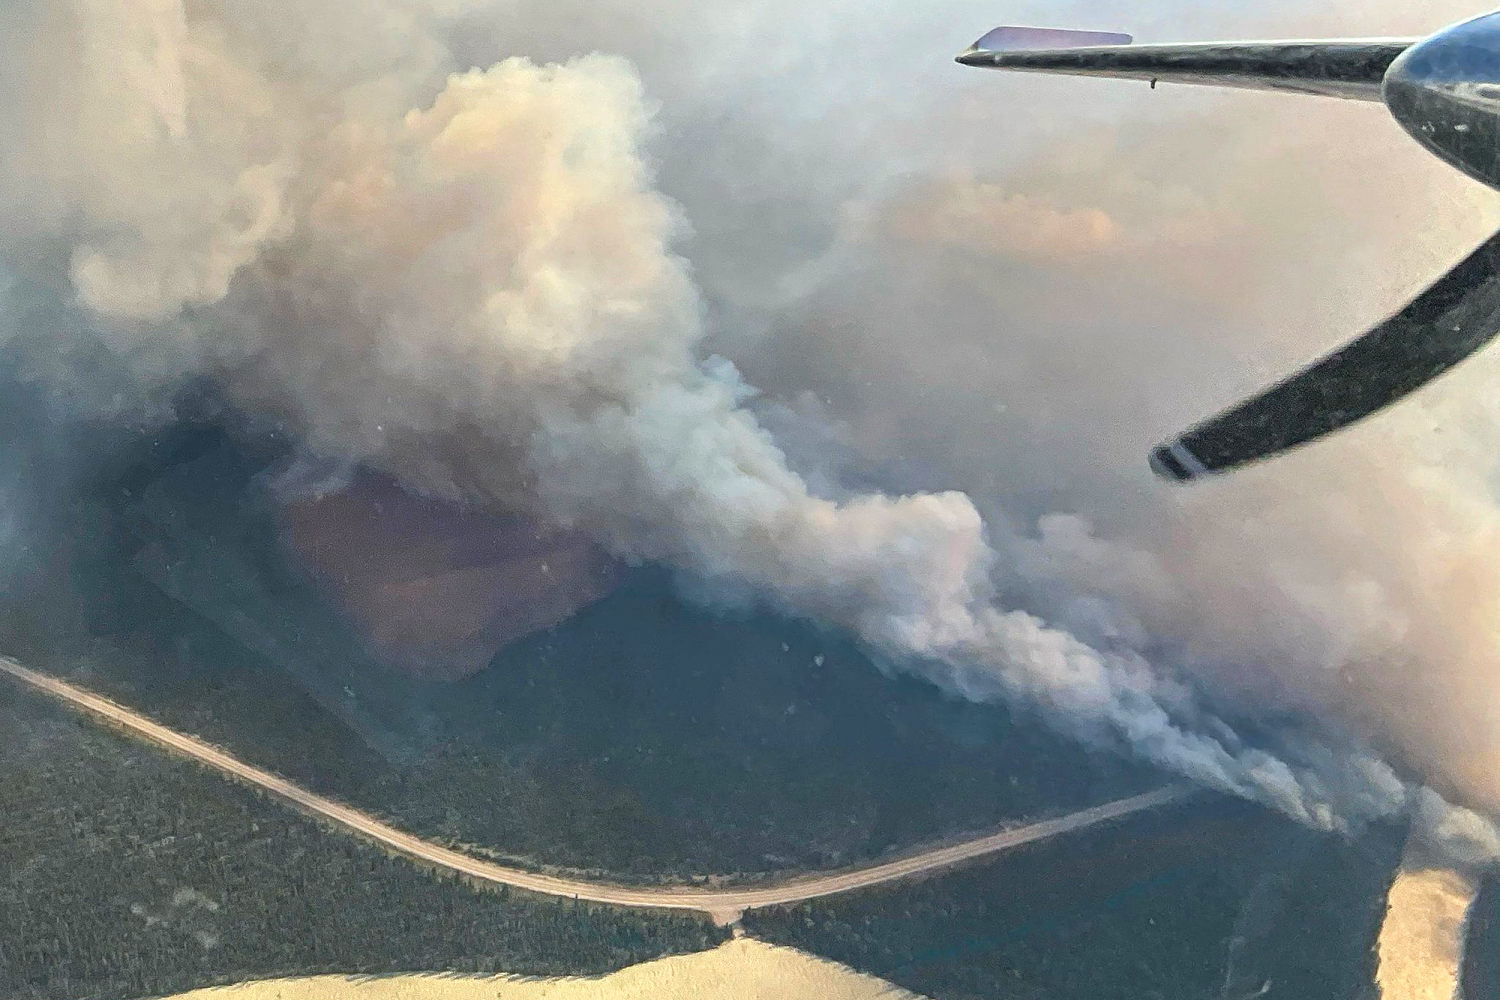 Wildfires blaze across western U.S. and Canada, prompting thousands to evacuate and poor air quality